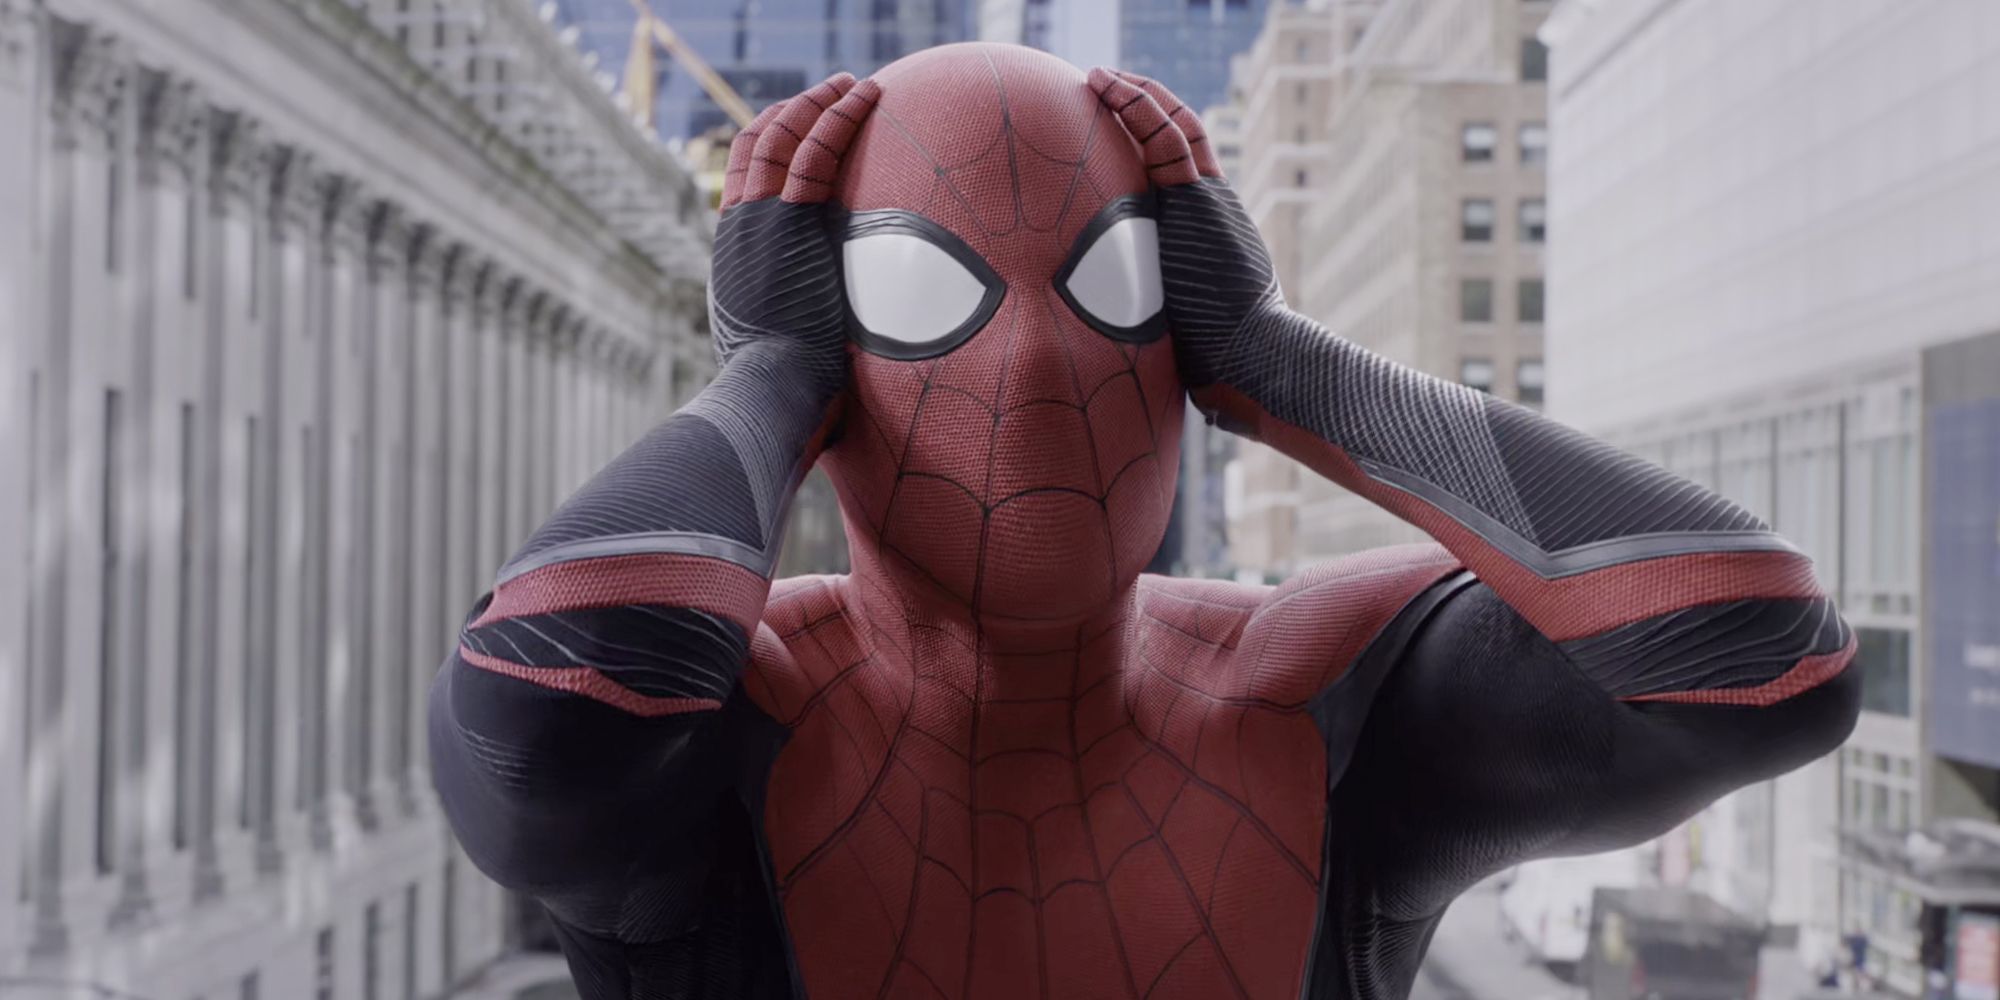 Peter Parker panics in New York in the mid-credits scene of Spider-Man Far From Home